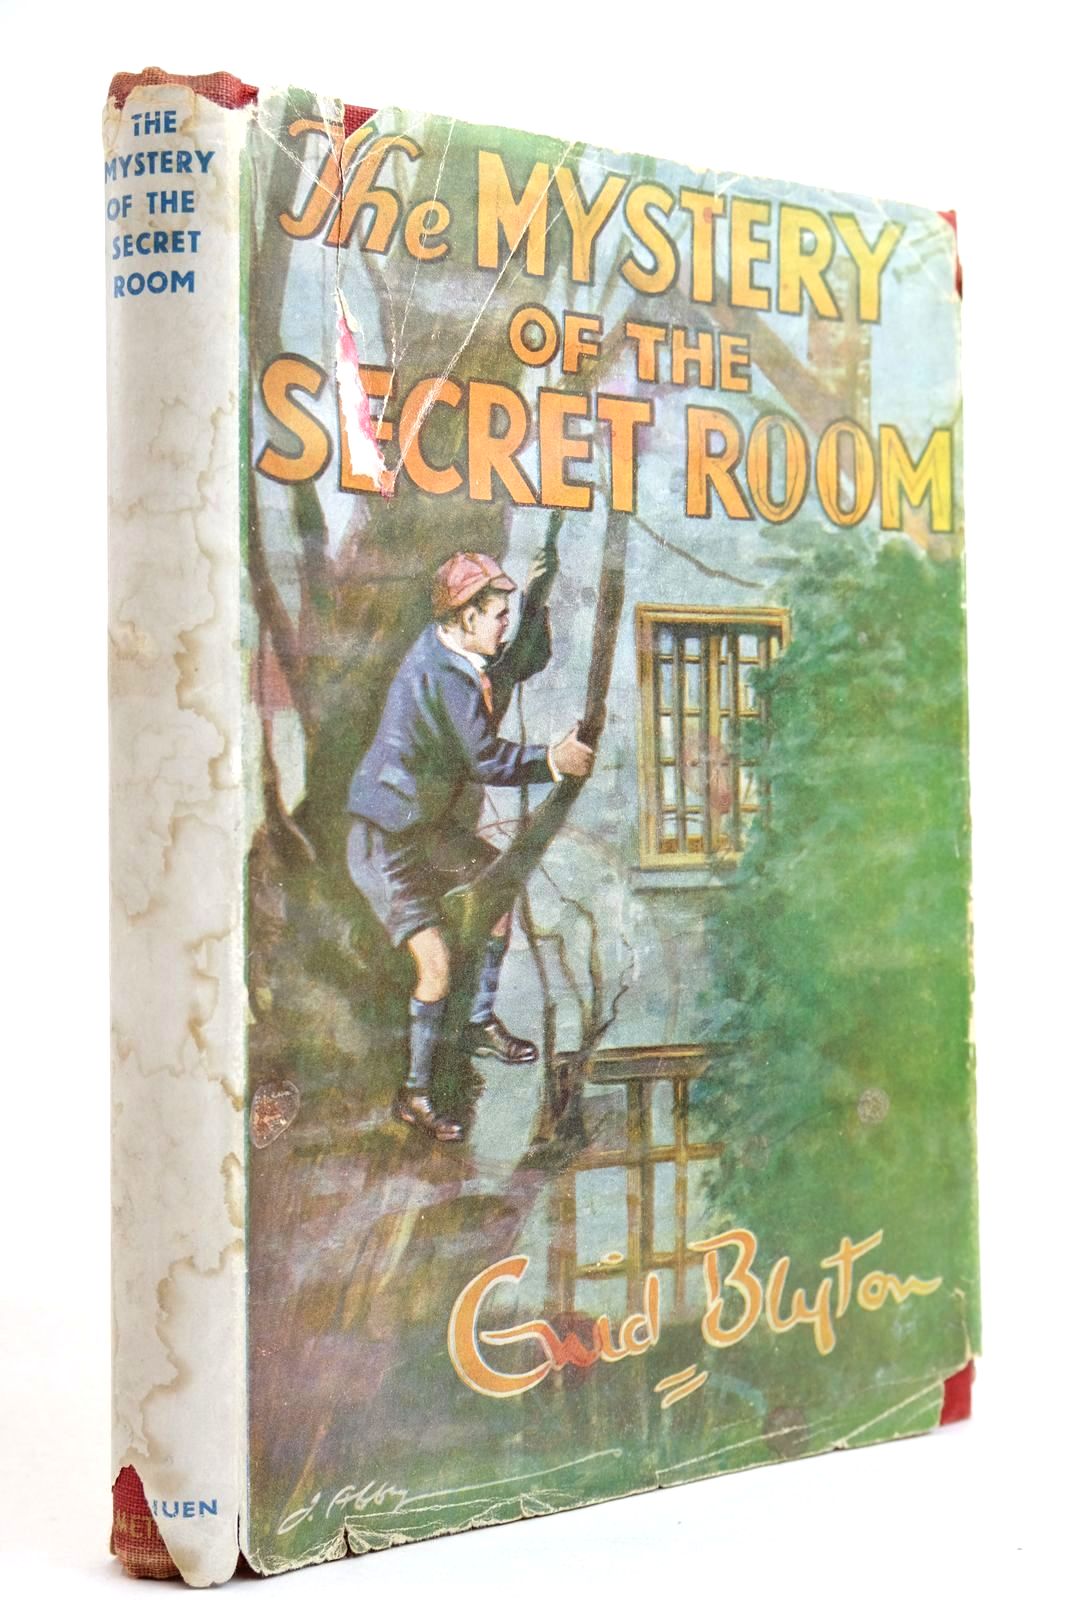 Photo of THE MYSTERY OF THE SECRET ROOM written by Blyton, Enid illustrated by Abbey, J. published by Methuen & Co. Ltd. (STOCK CODE: 2134316)  for sale by Stella & Rose's Books